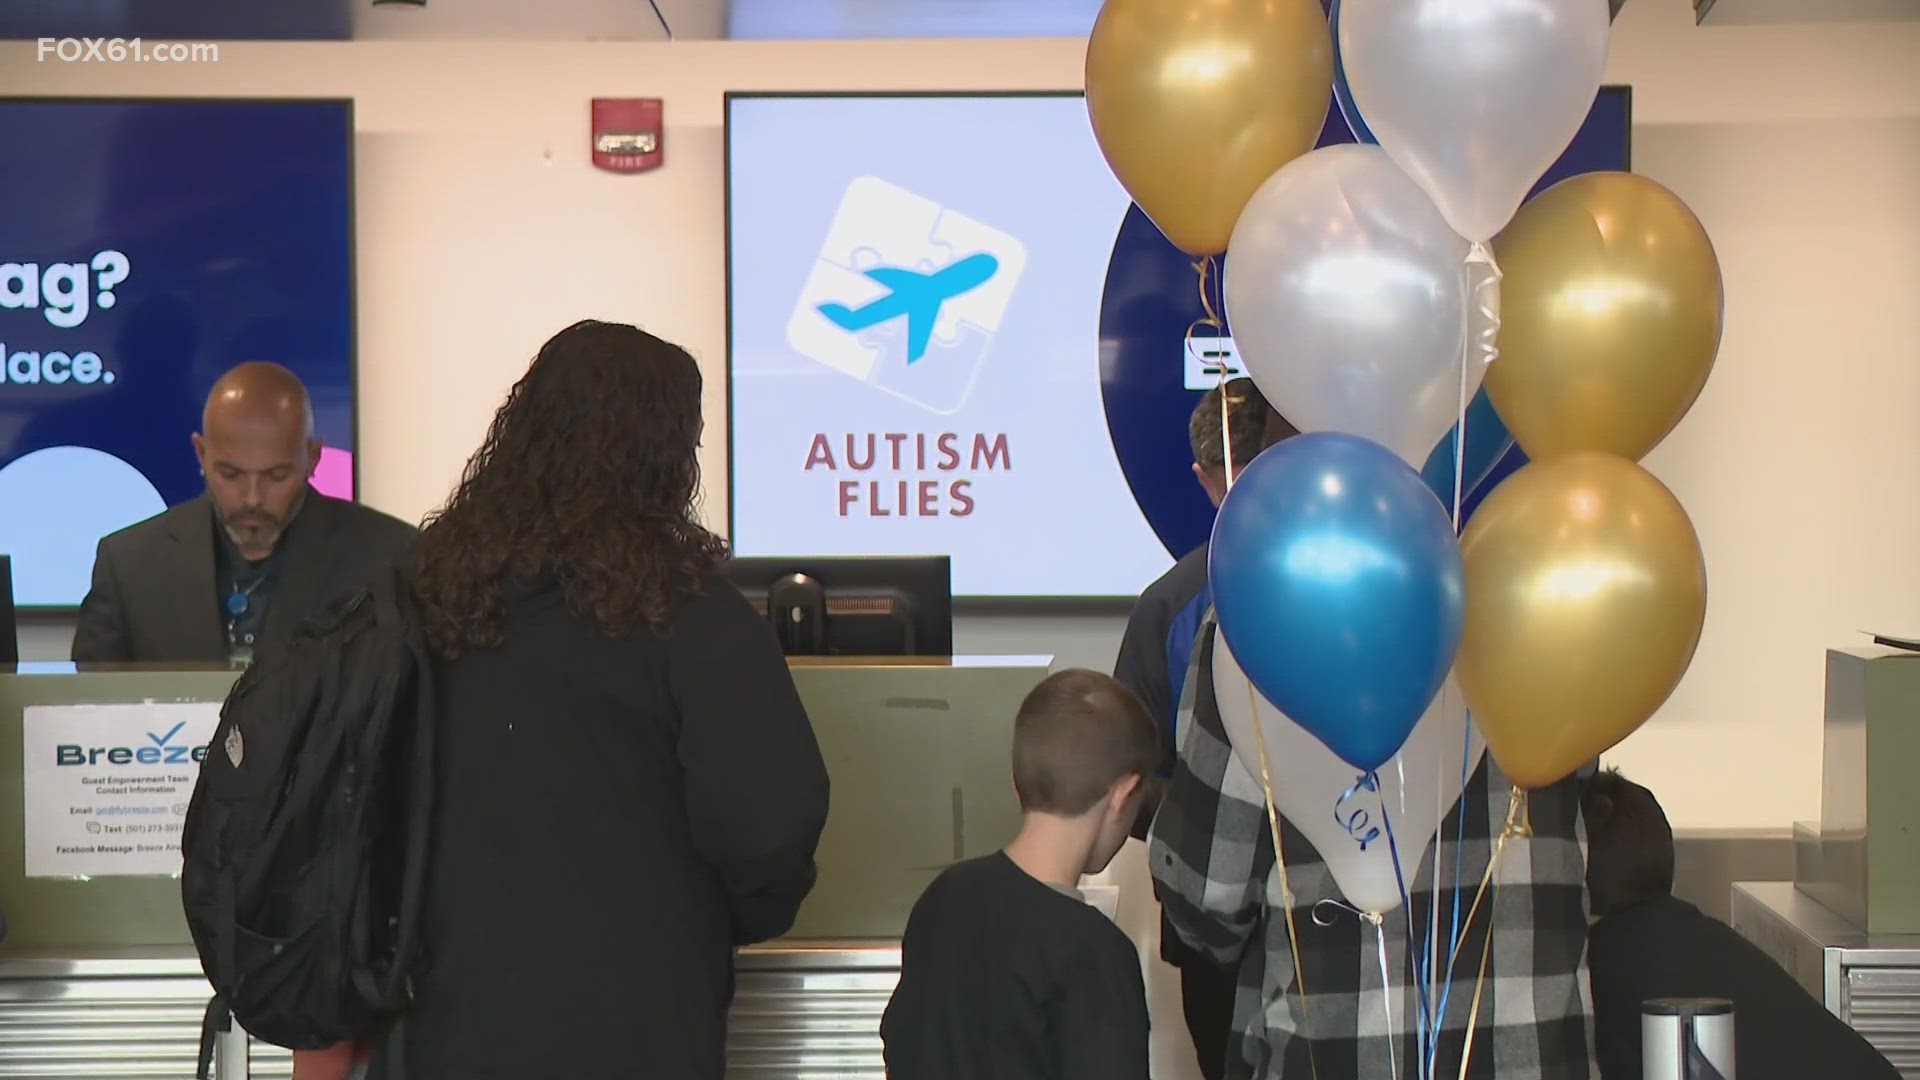 The exercise was led by Autism Double-Checked, an organization that trains people in the hospitality industry on how to meet the needs of people with autism.